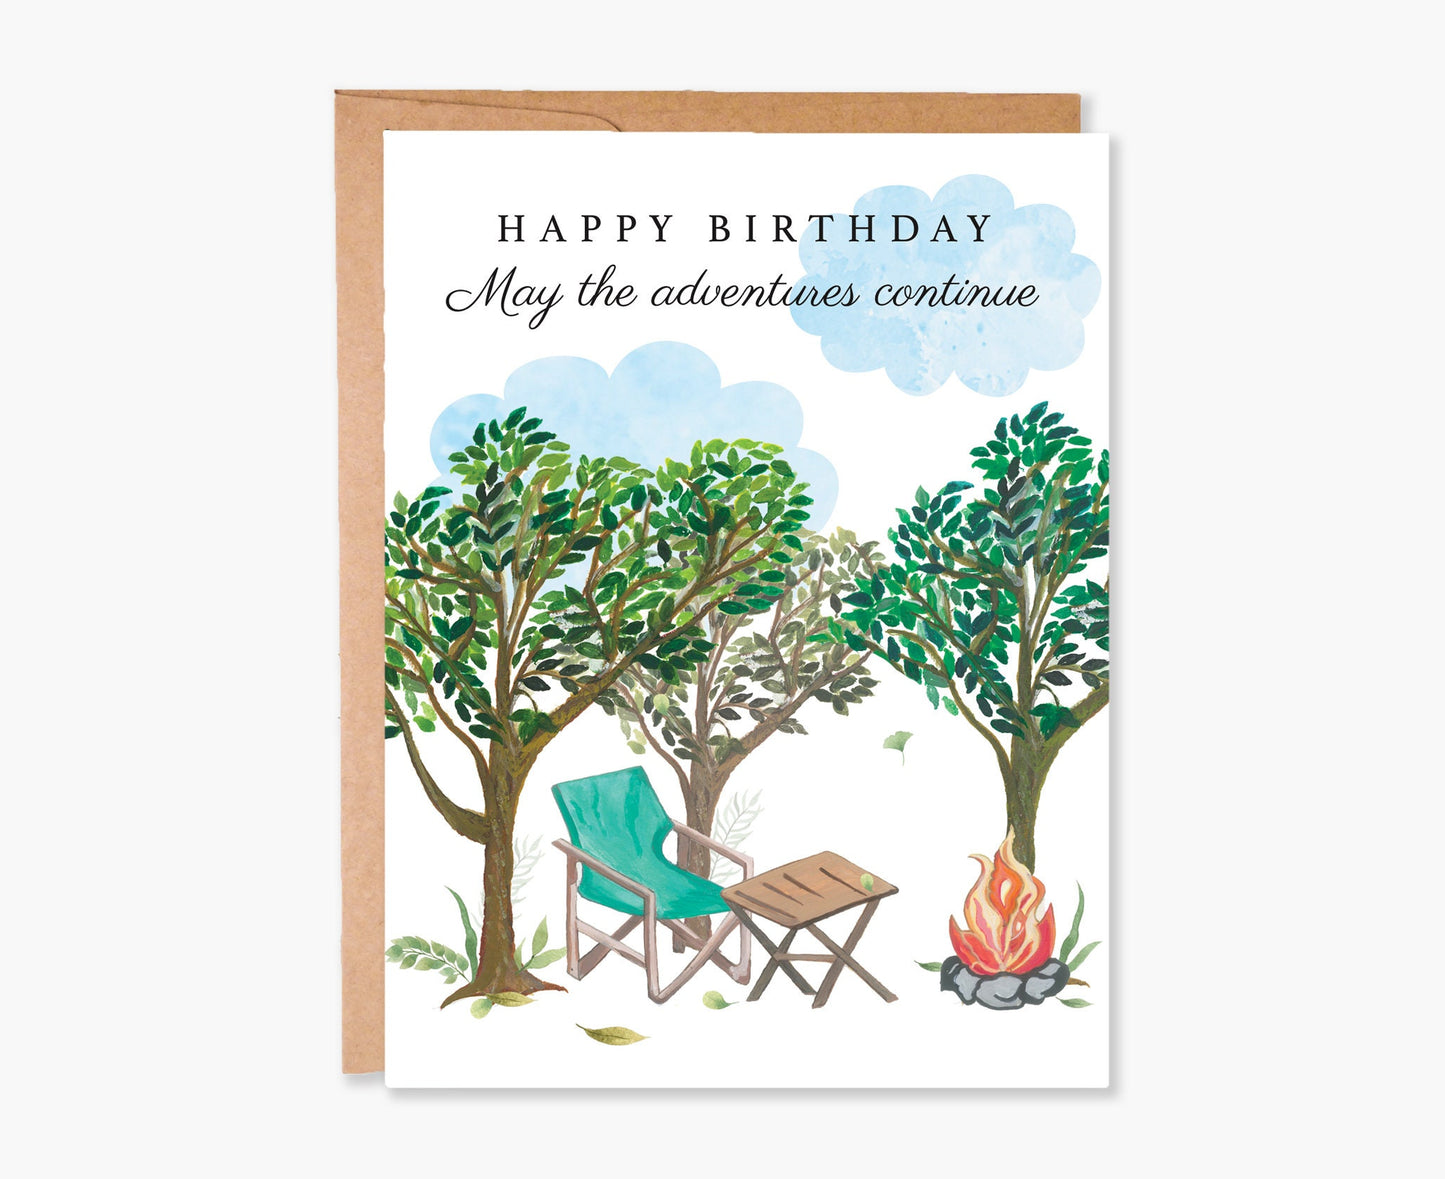 Happy Birthday Card for Him, Birthday Card for Her, Camping Outdoors Birthday Greeting, Adventure Card, Nature Card, Item Code - COTC B02